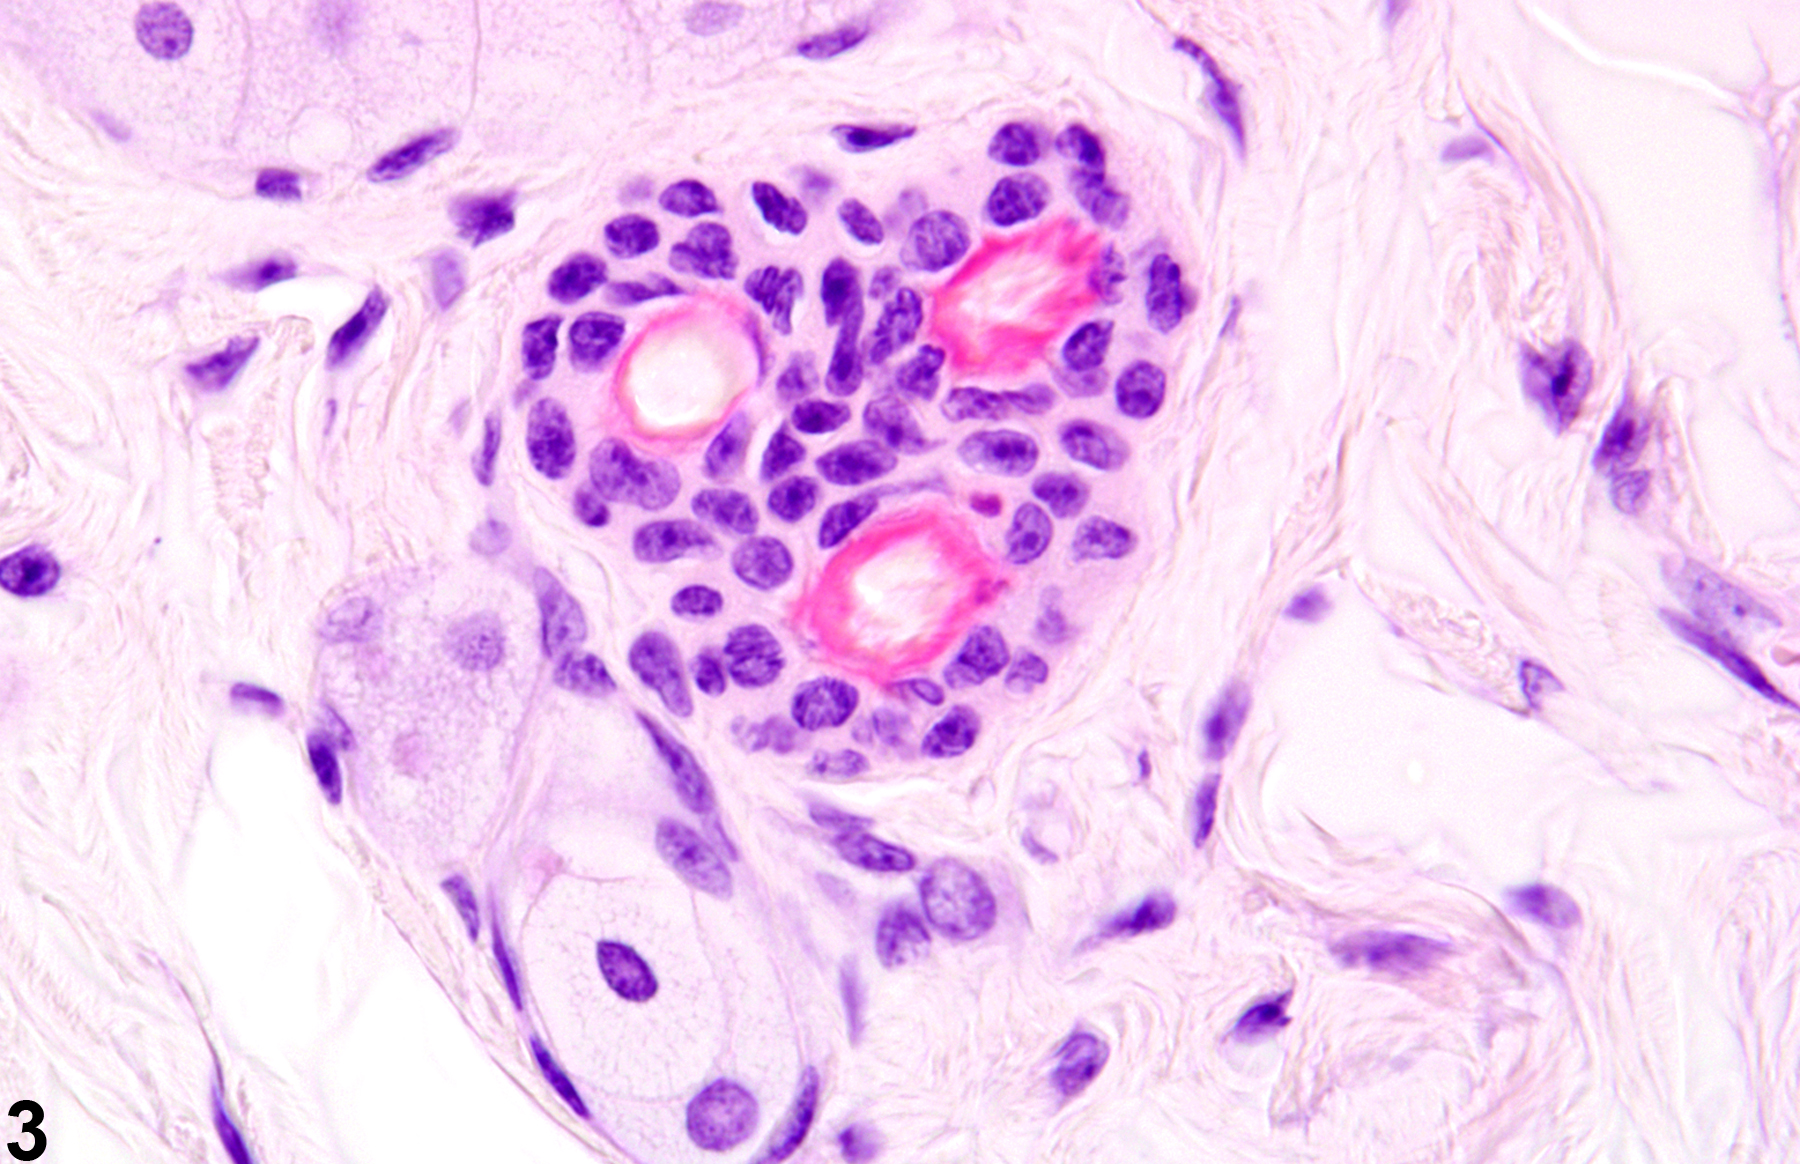 Image of atrophy in the skin adnexa from a male B6C3F1 mouse in a chronic study